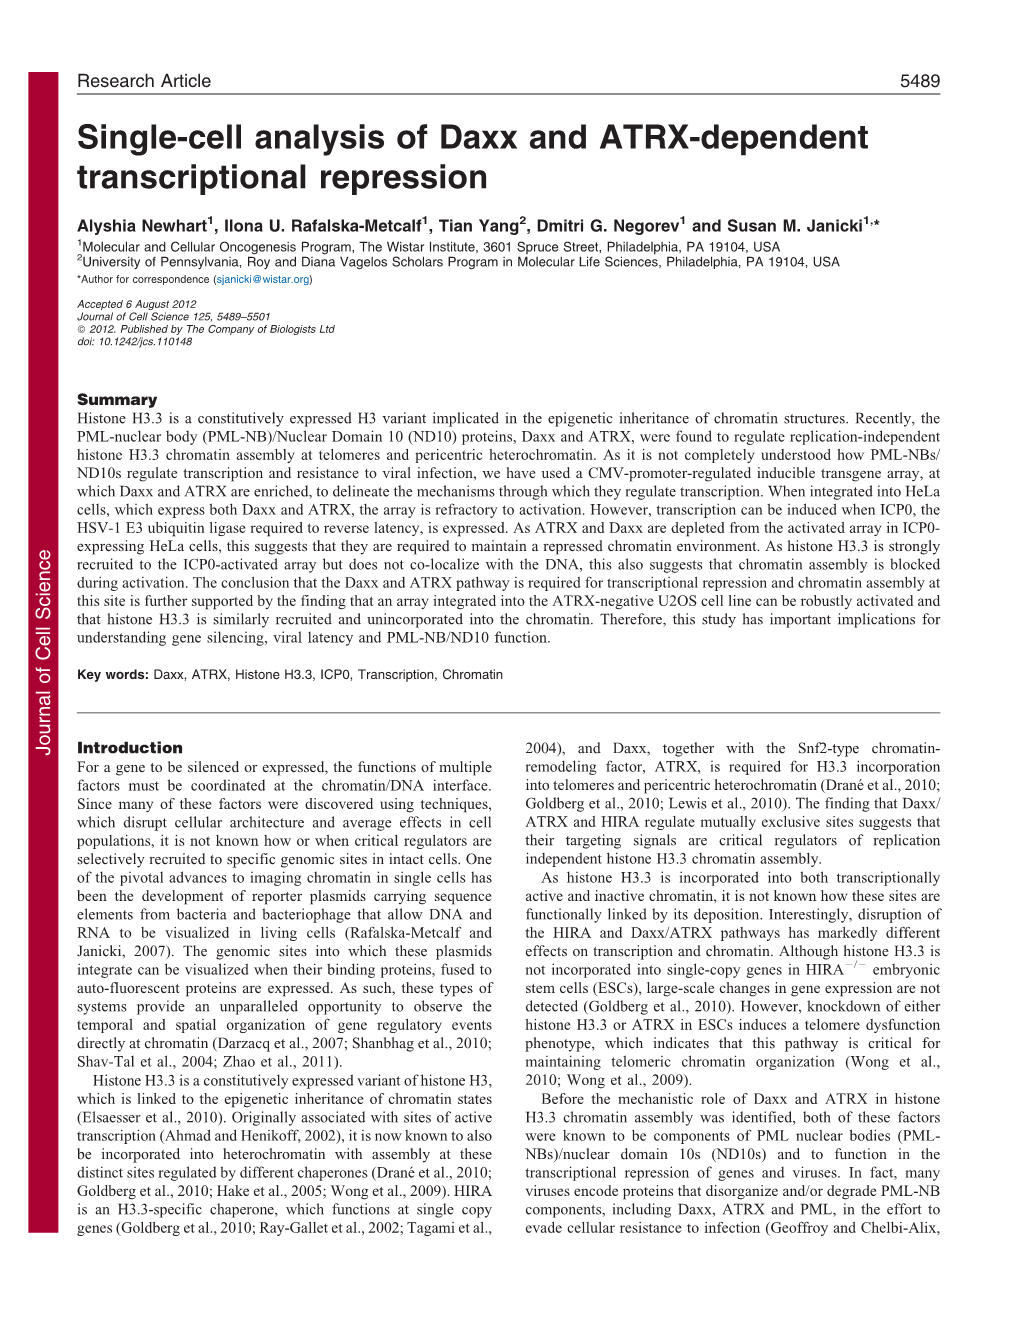 Single-Cell Analysis of Daxx and ATRX-Dependent Transcriptional Repression